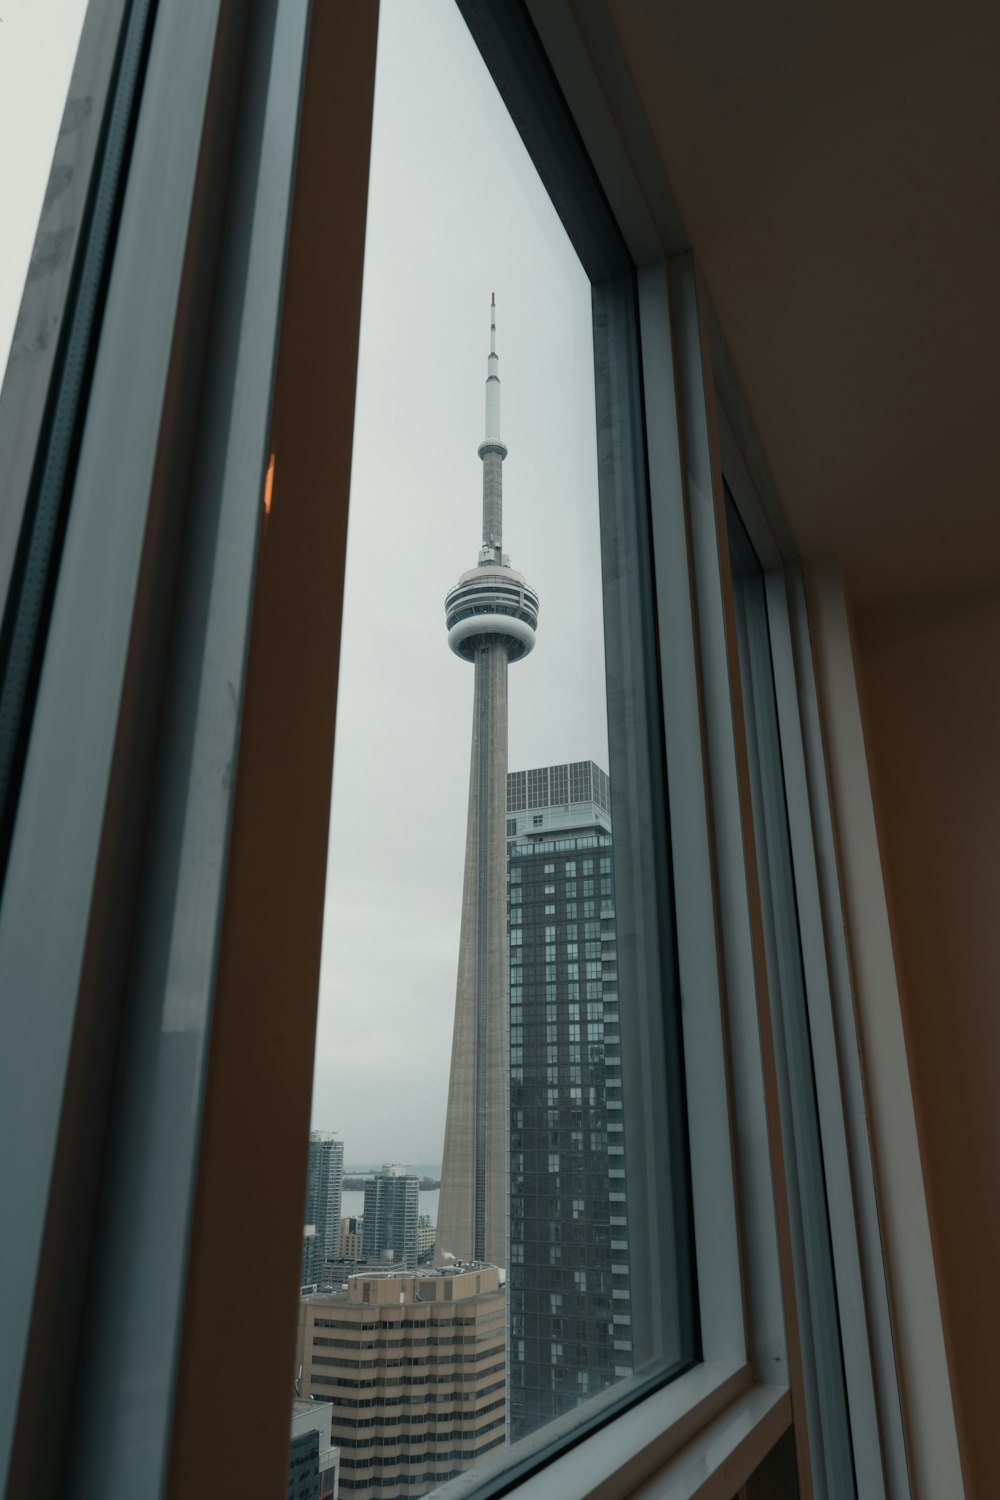 a view of a tall building from a window